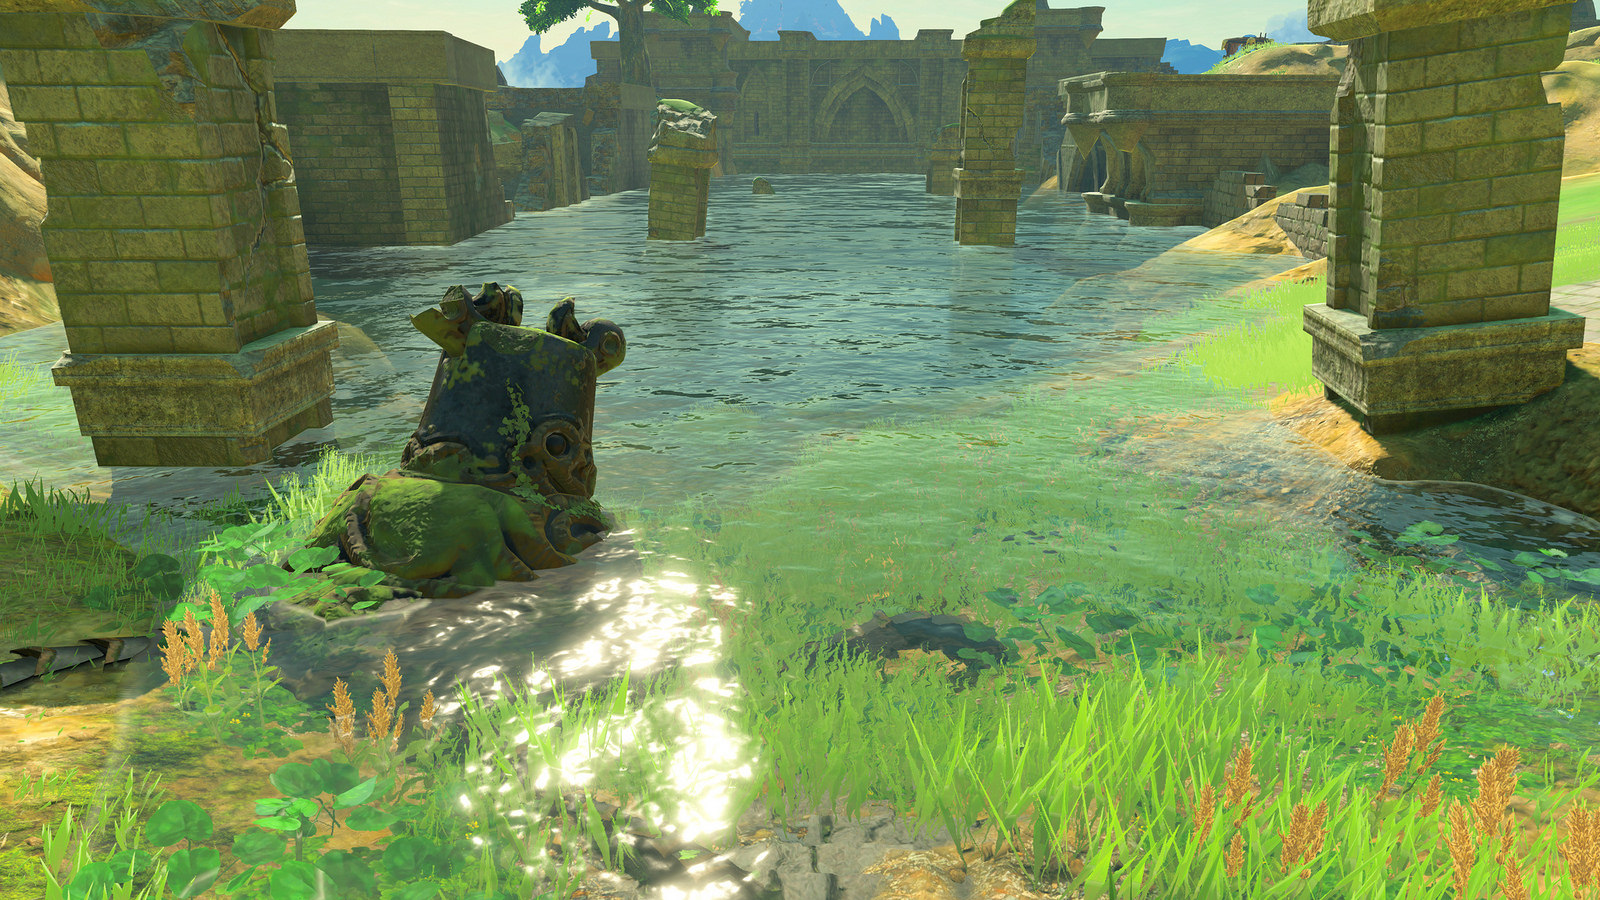 10 New Breath Of The Wild Dual Monitor Wallpaper Full Hd 1080p For